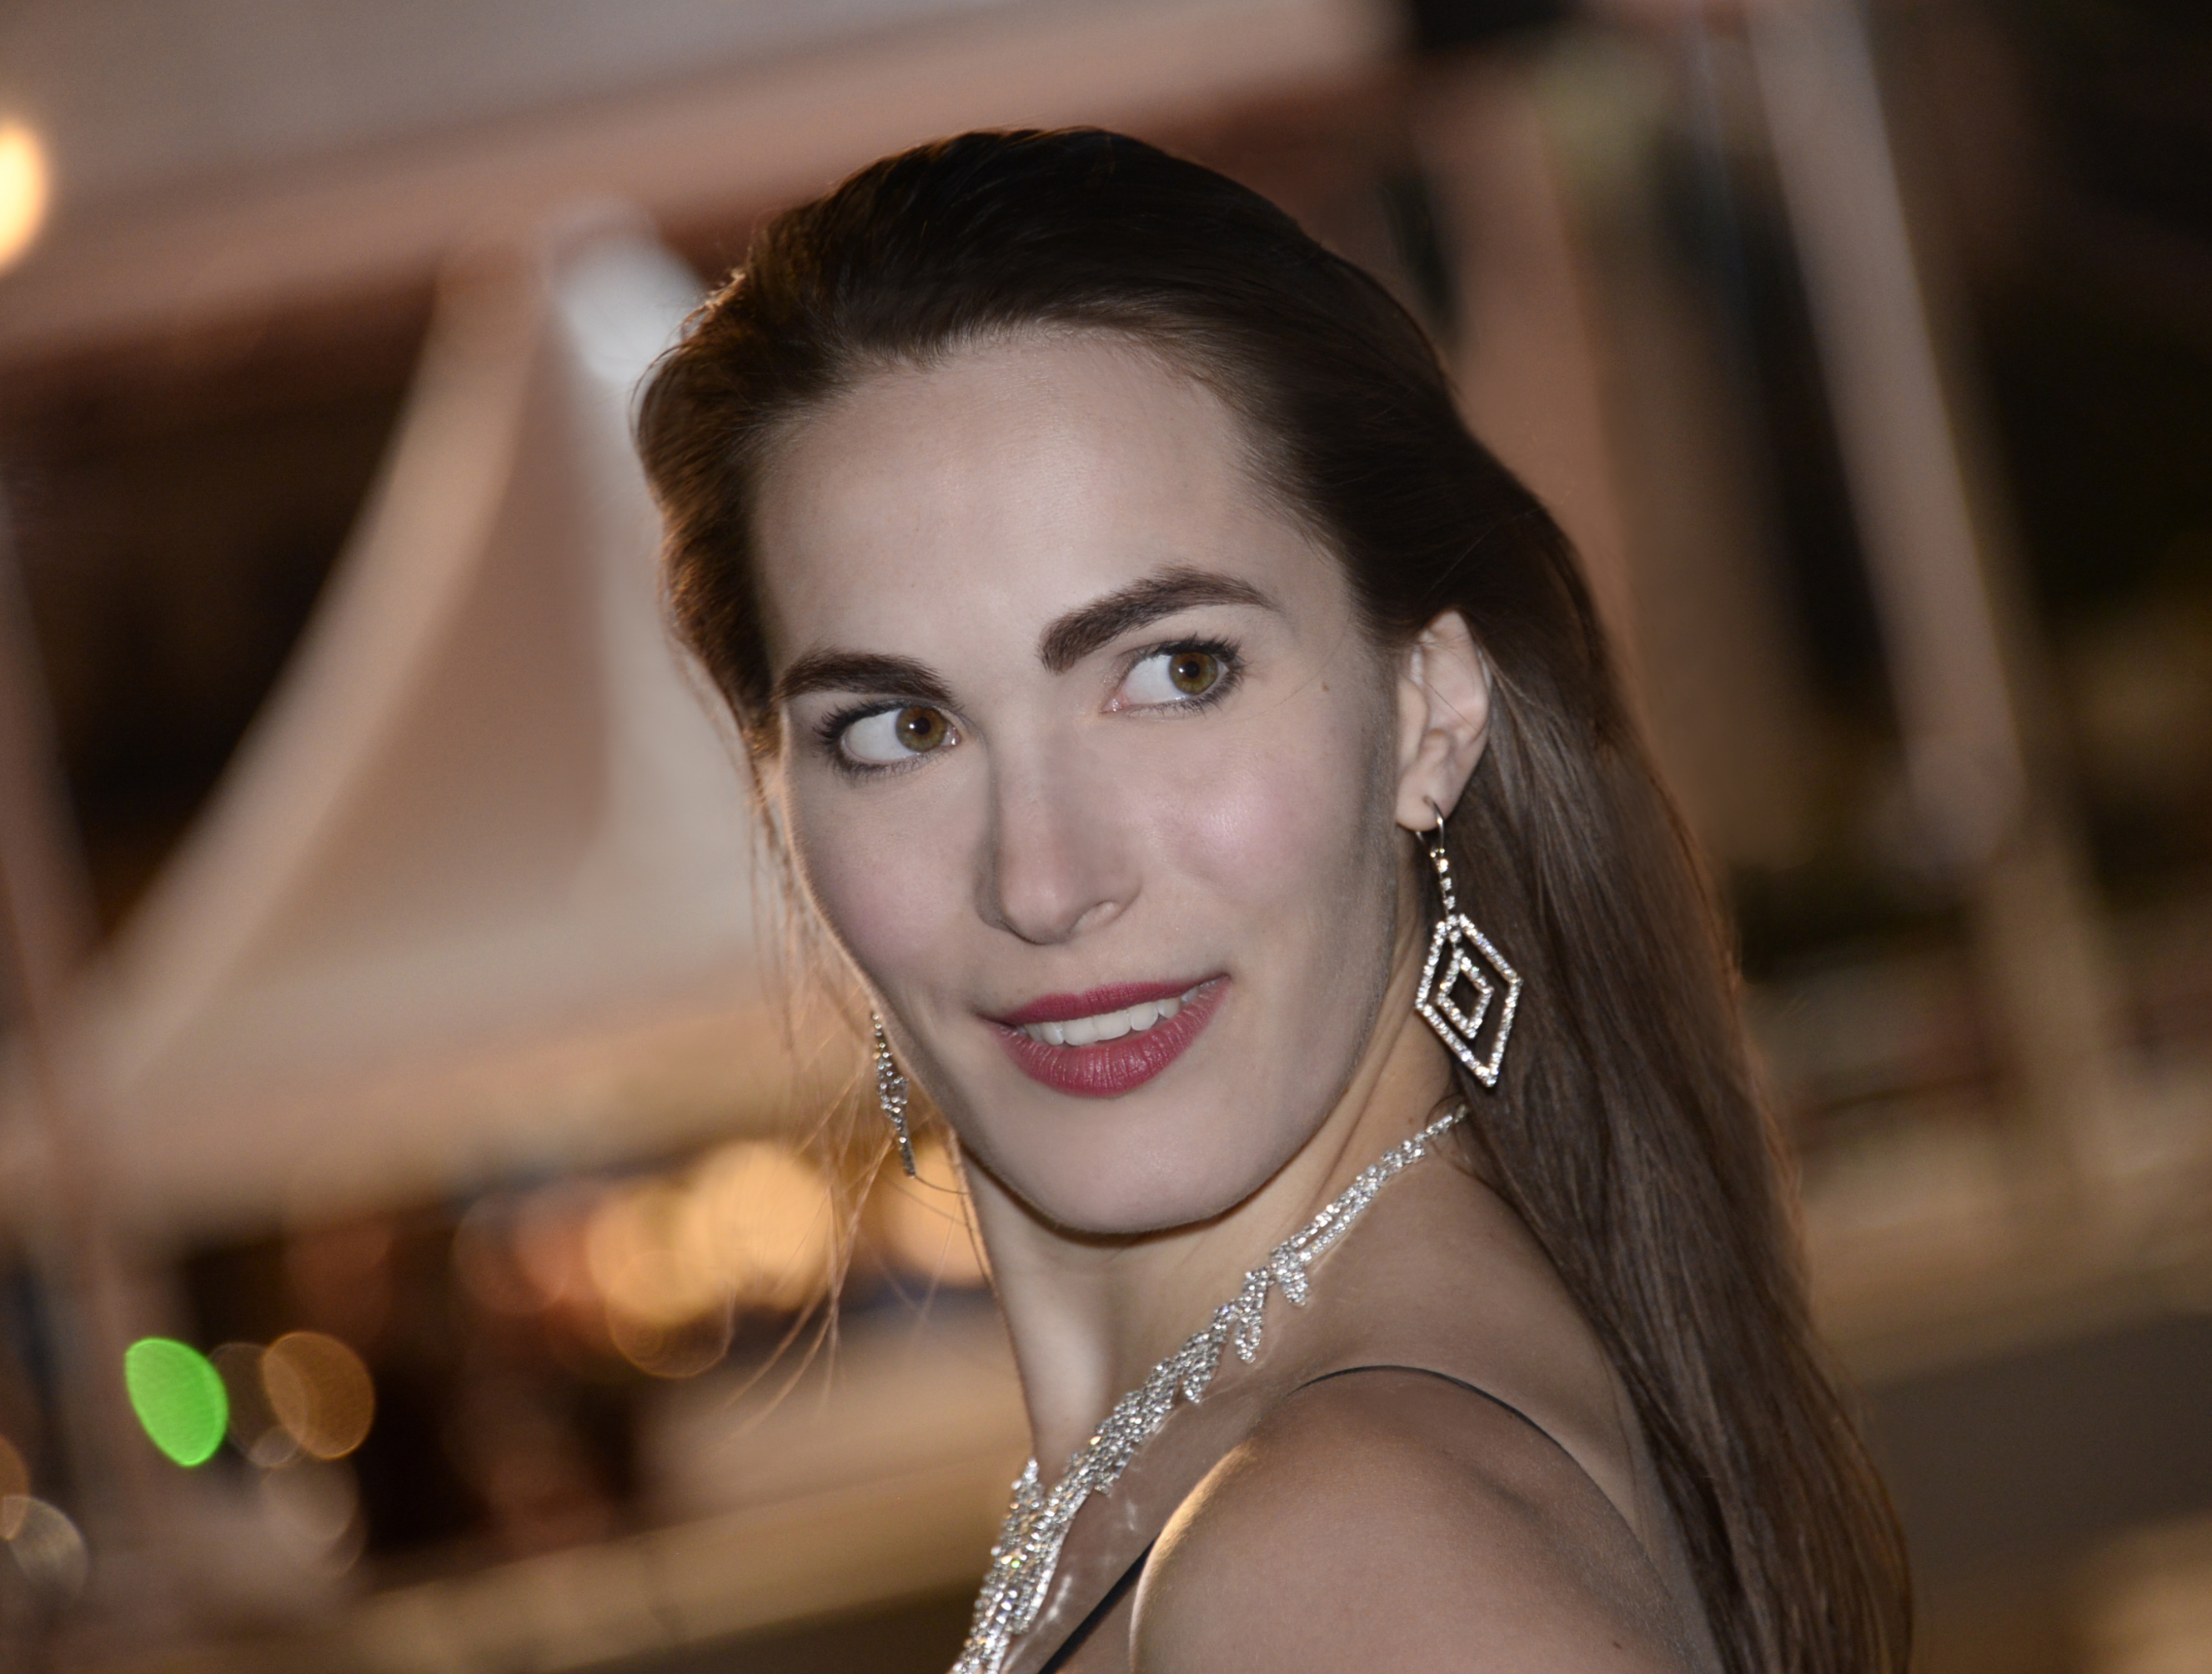 Marianne Bourg at Cannes Film Festival 2015